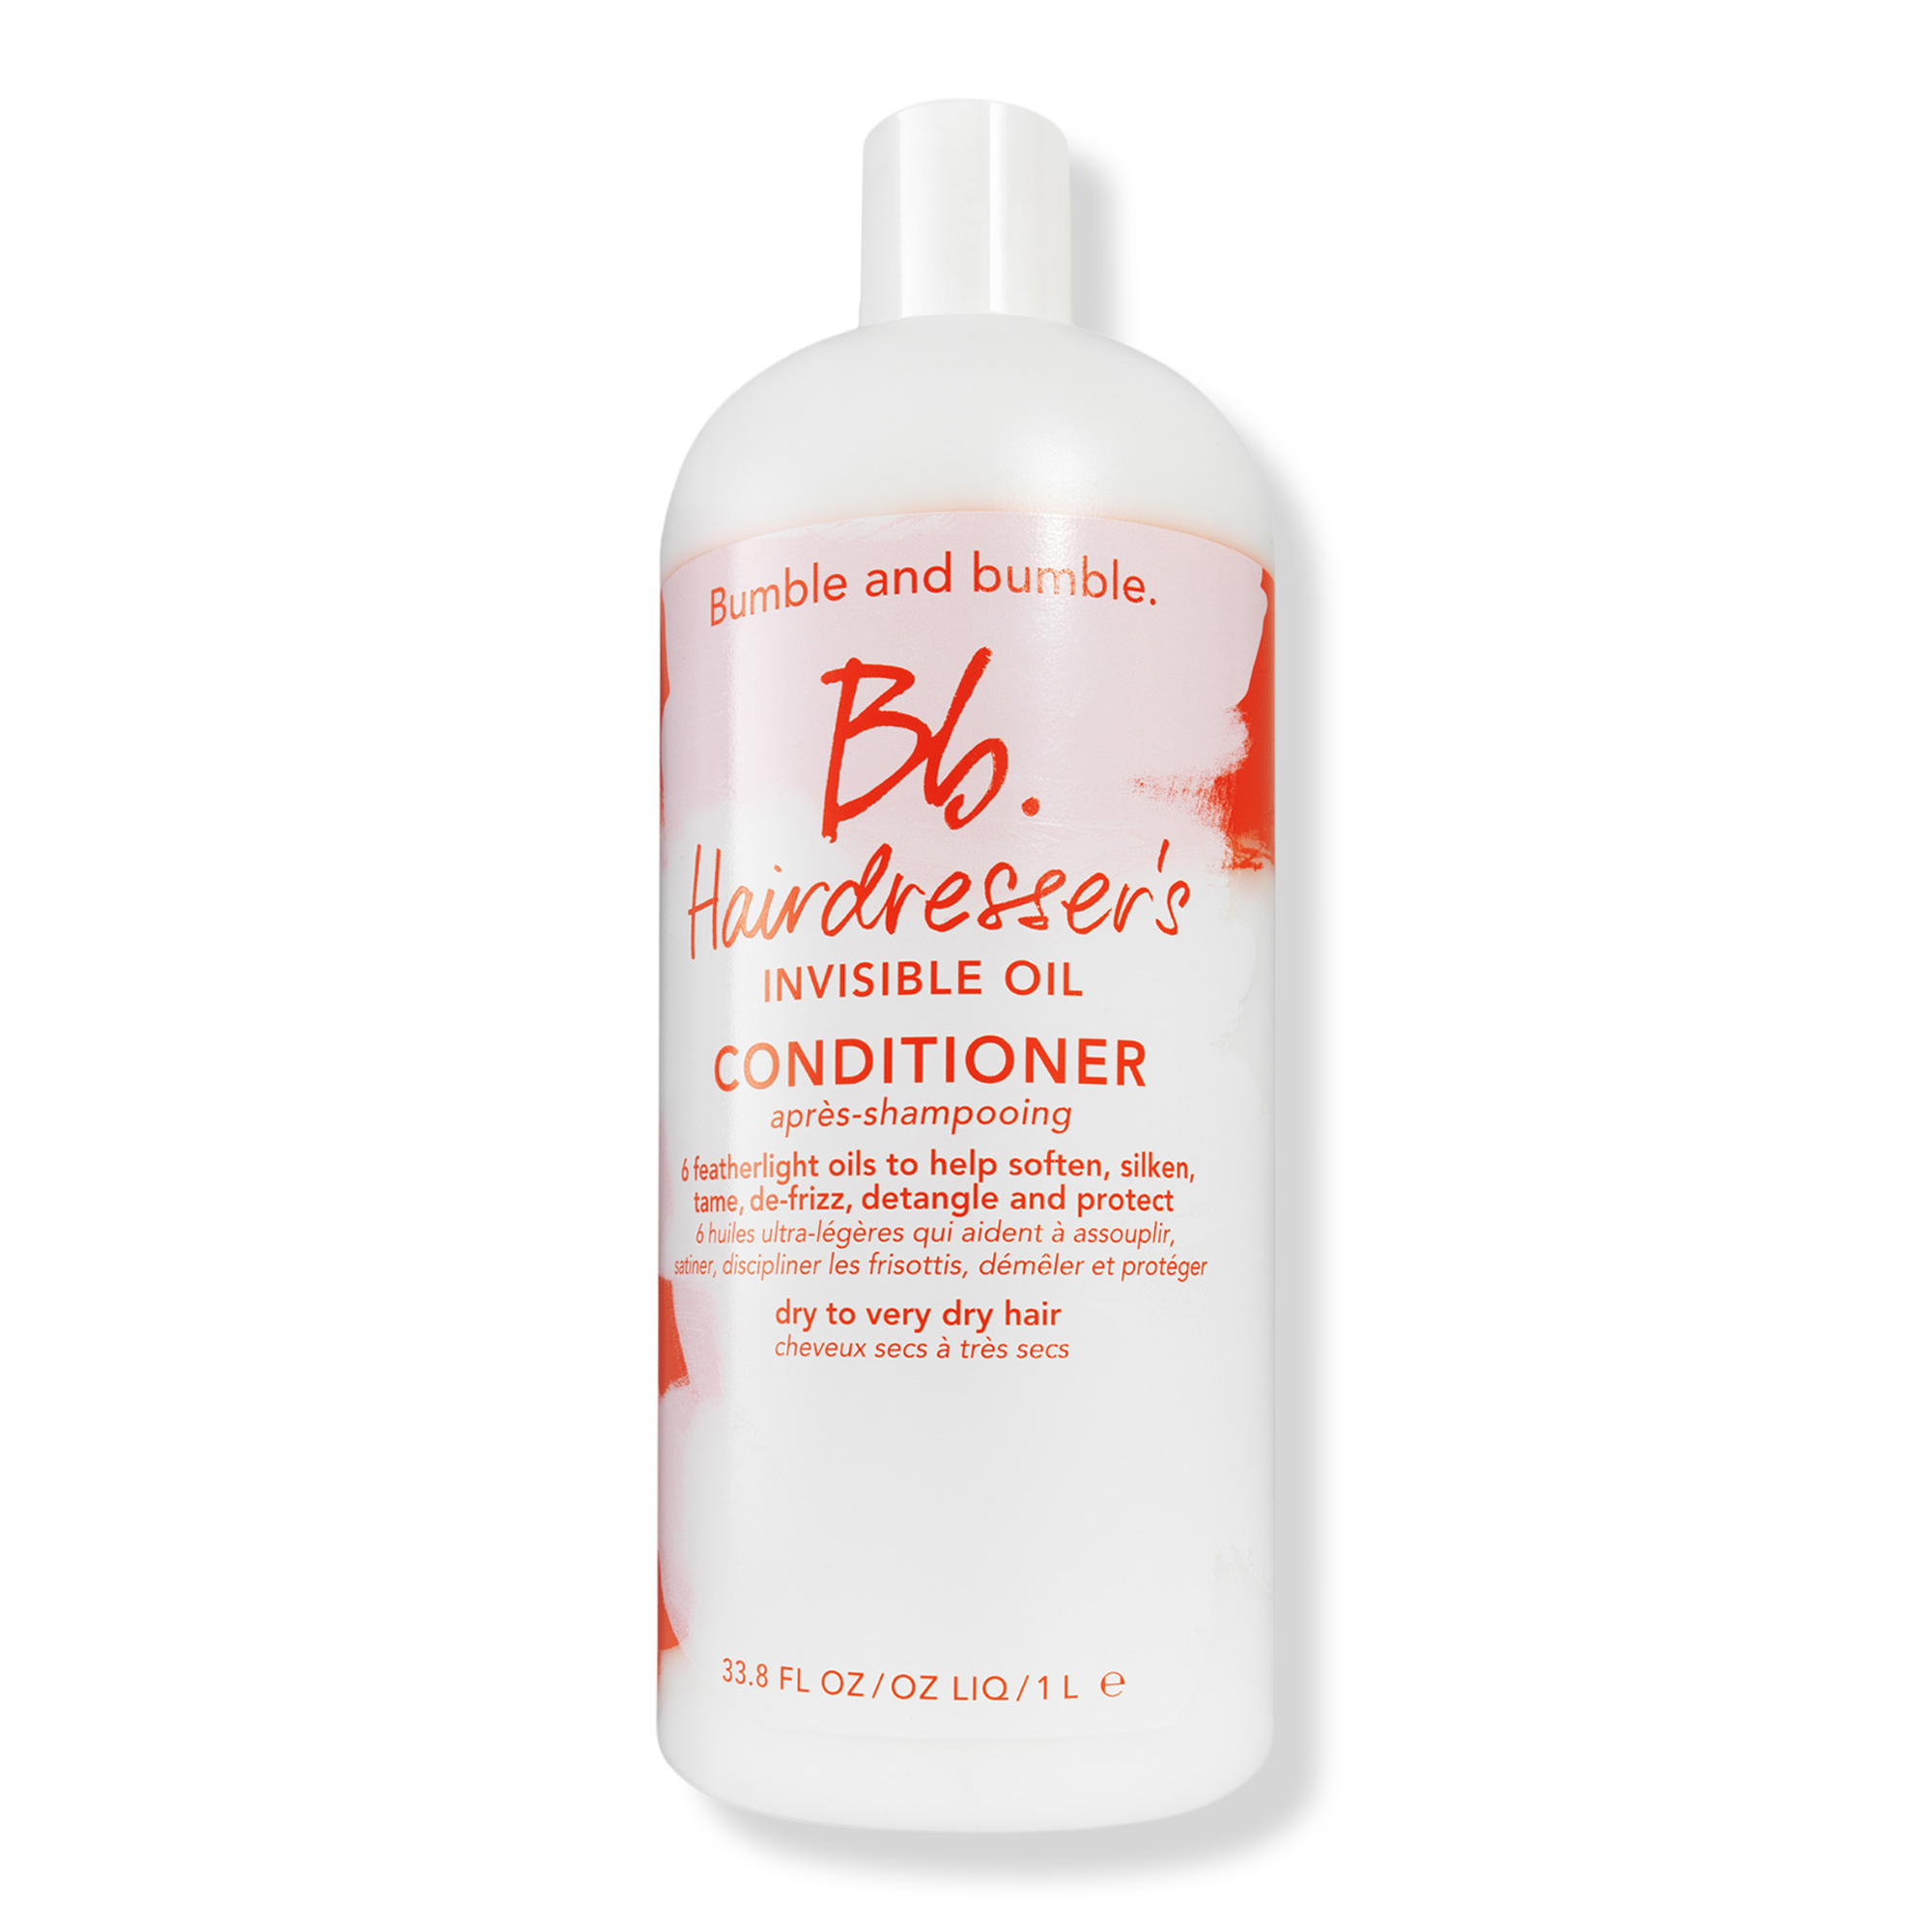 Bumble and bumble Hairdresser's Invisible Oil Conditioner / 33OZ